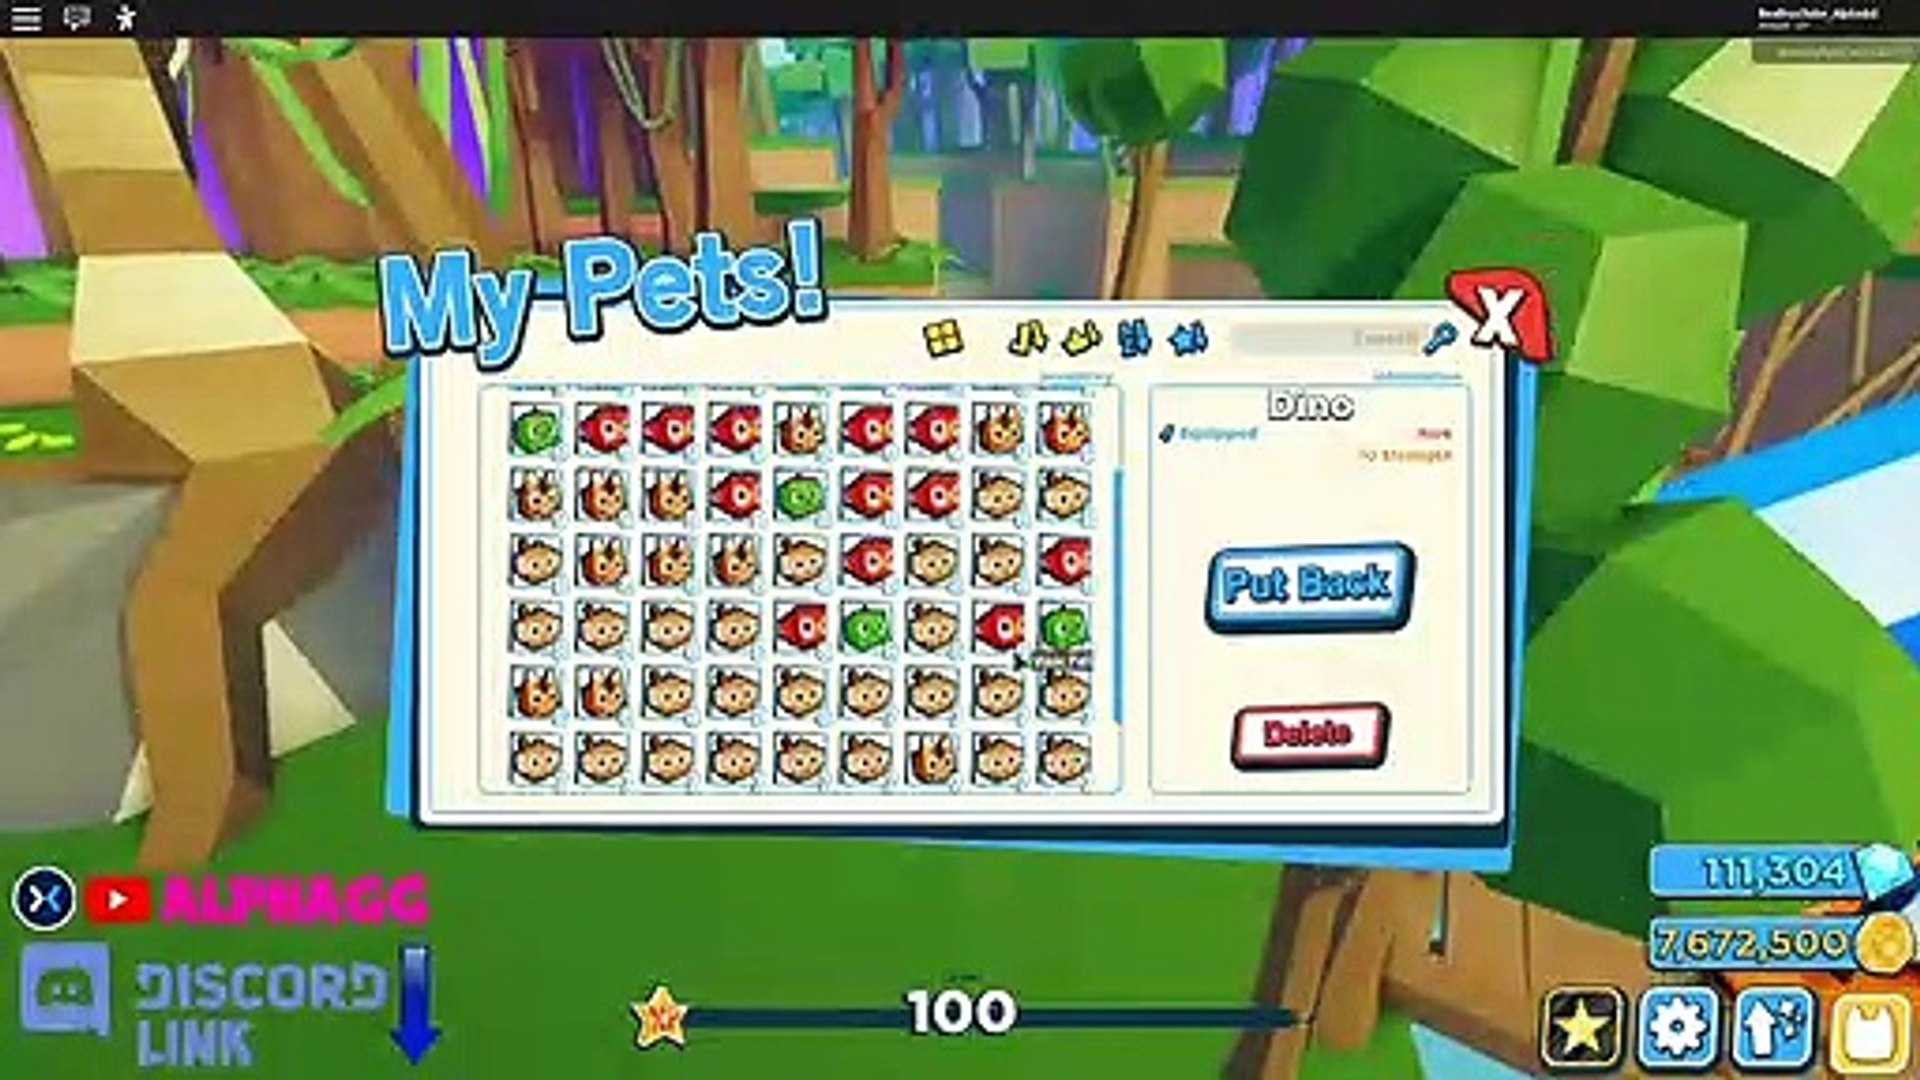 Spending 10 000 000 Coins To Get The Legendary Secret Pet In Pet Simulator 2 Roblox Video Dailymotion - roblox pet simulator best chest